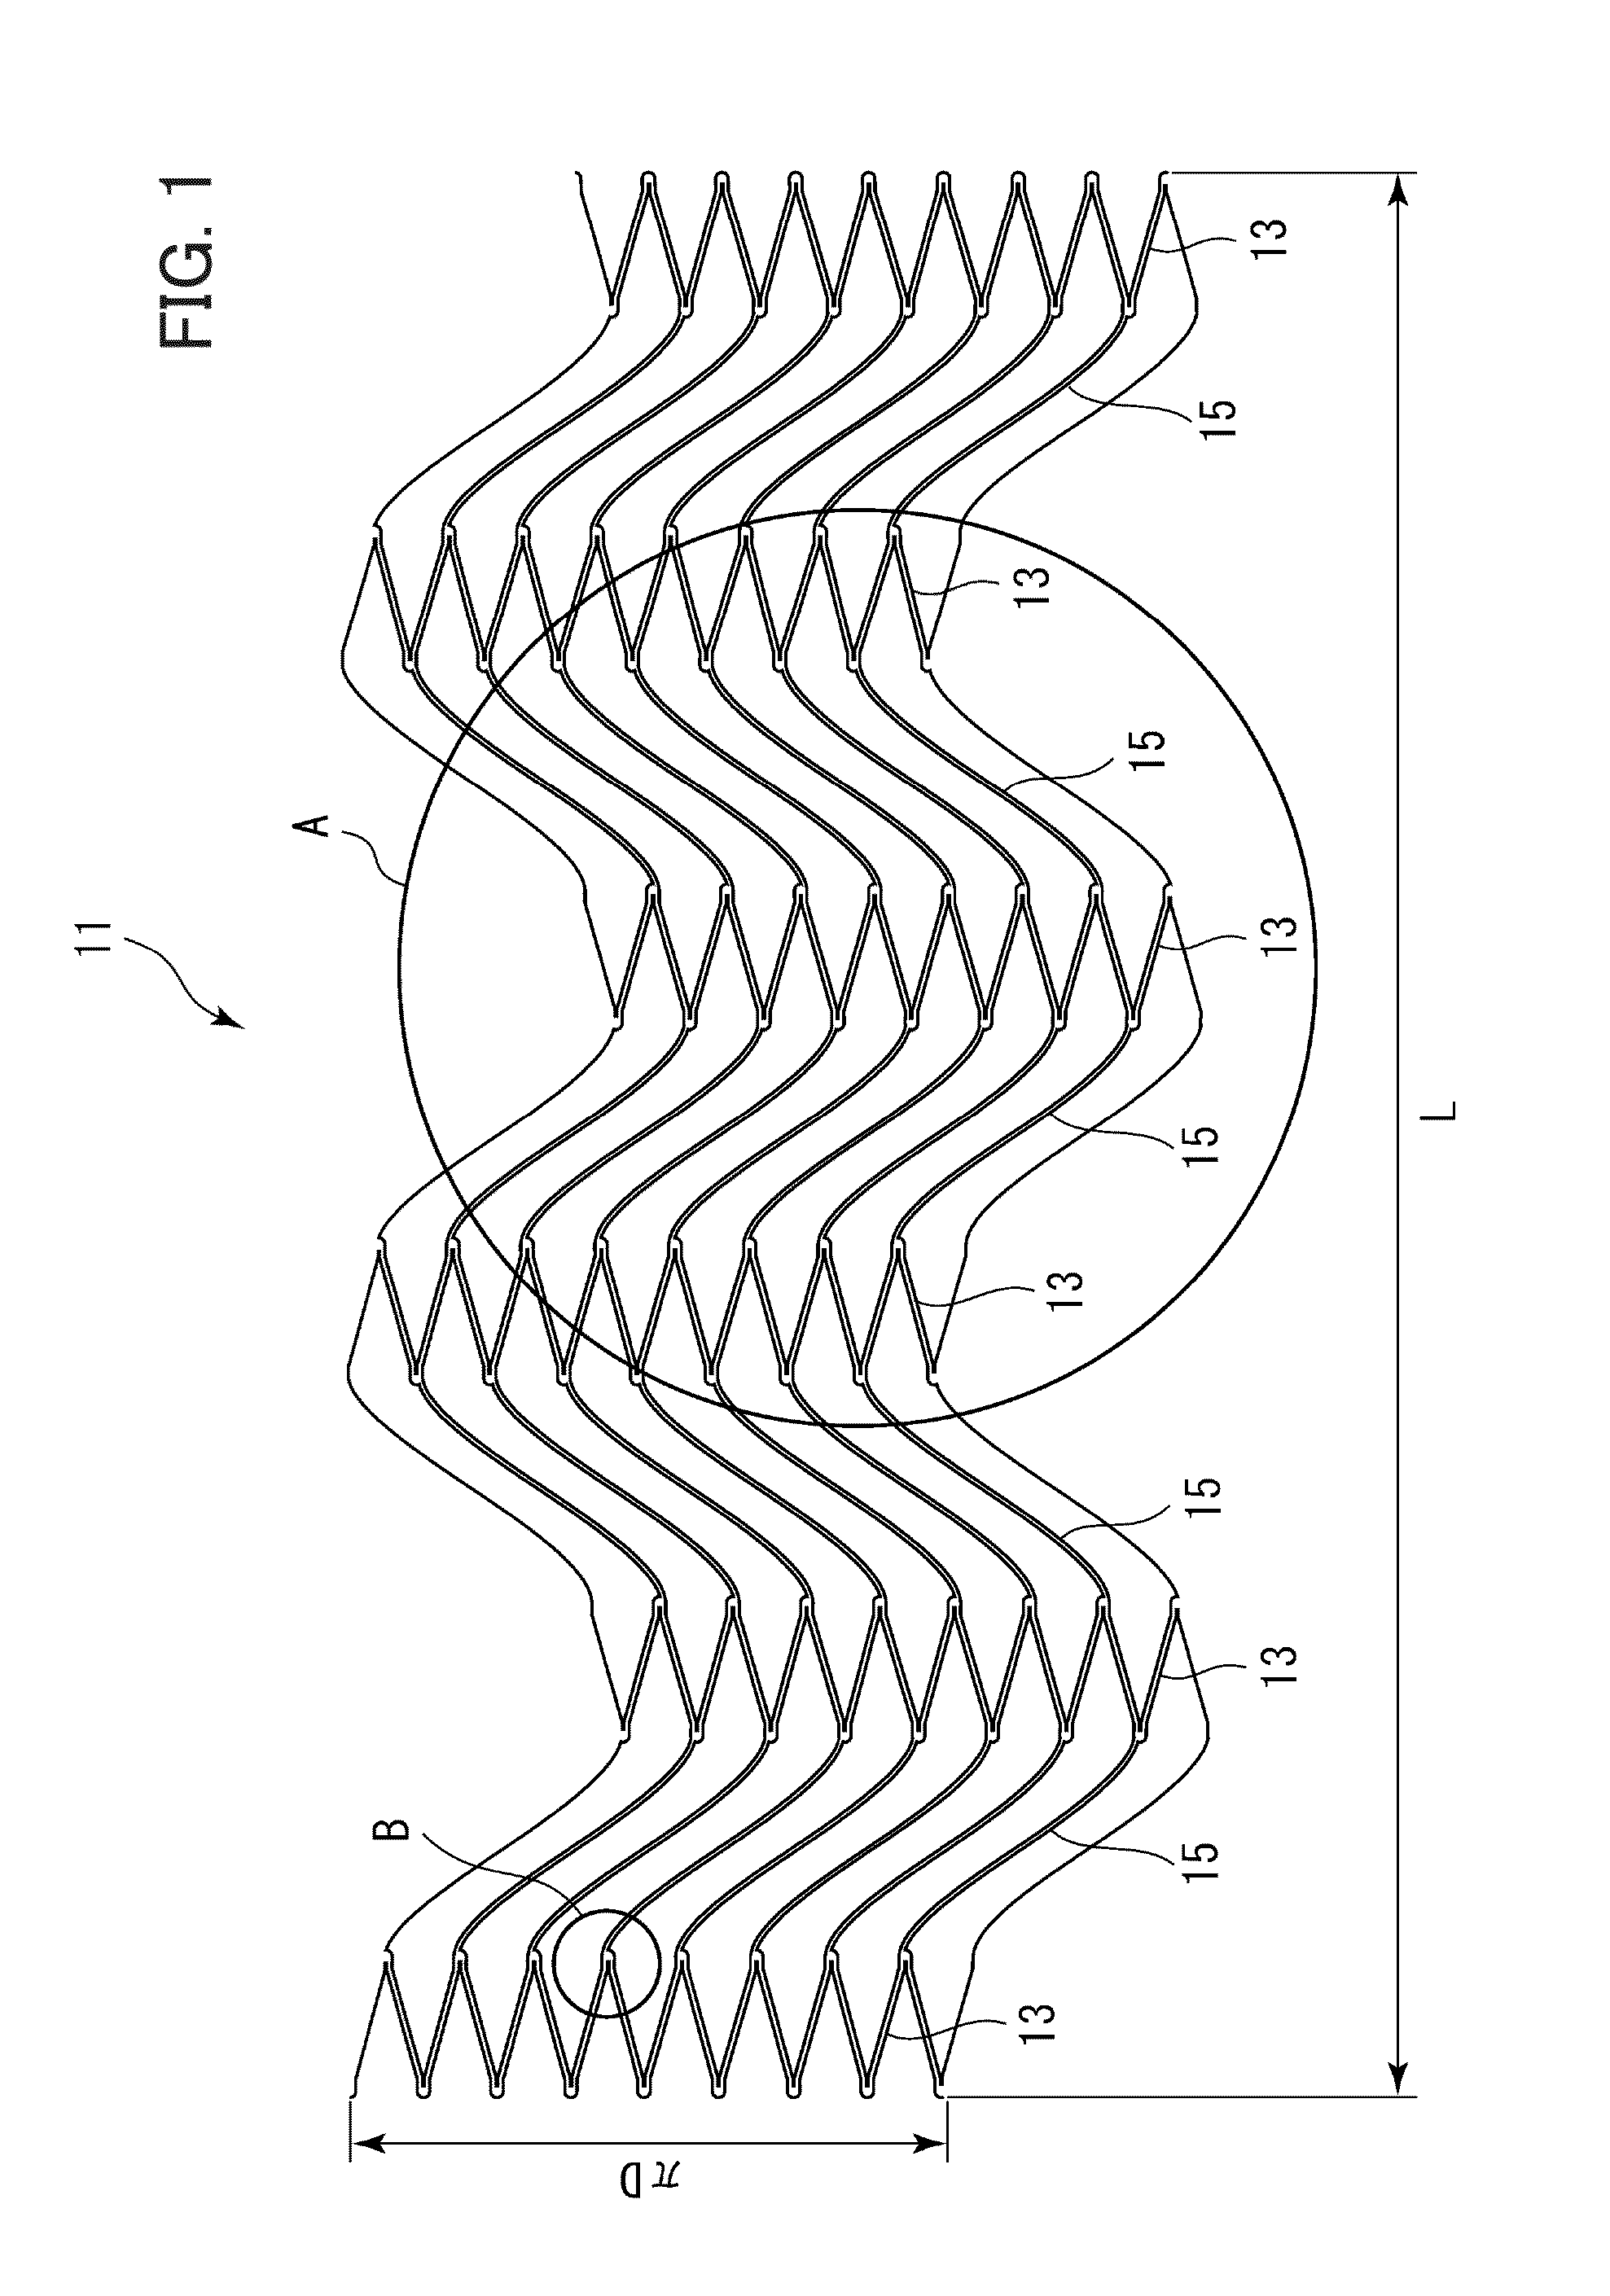 Highly flexible stent with sinusoidal pattern